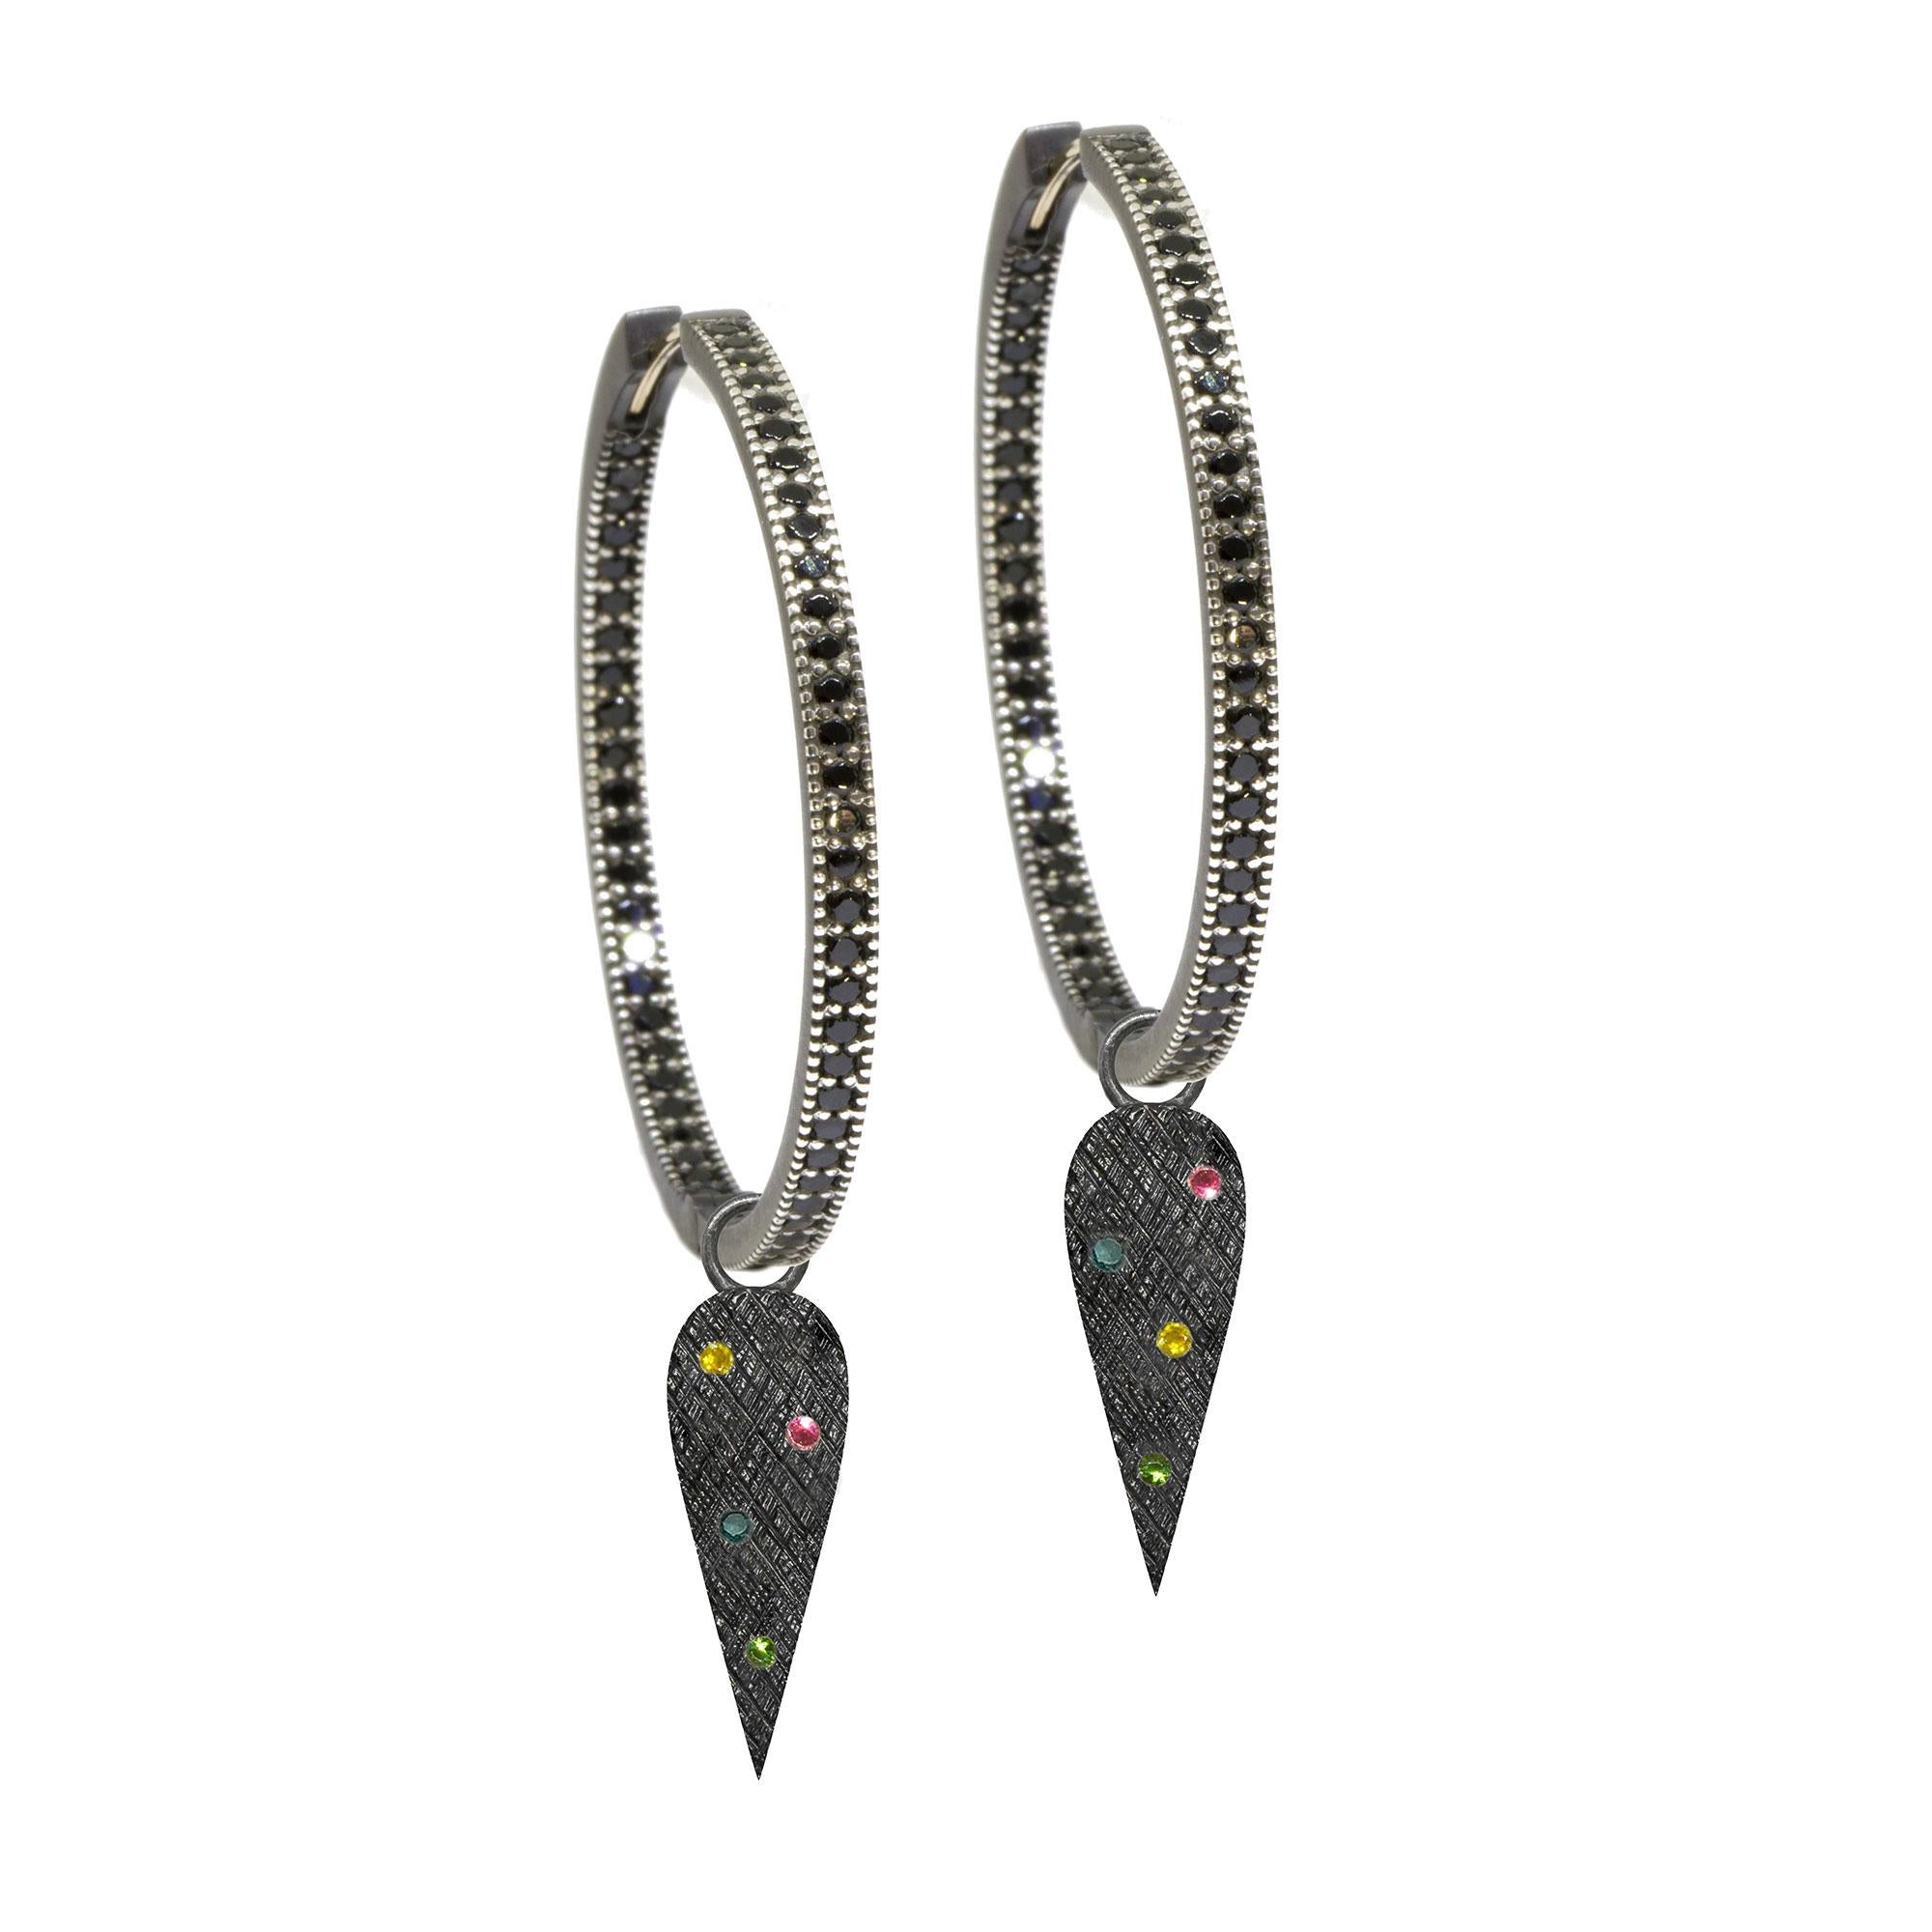 The perfect everyday style, especially when you want a subtle pop of color, the Angel Wings 20mm Oxidized Charms scatter tourmalines on a blackened silver background detailed with a feather-like crosshatch pattern.

Nina Nguyen Design's